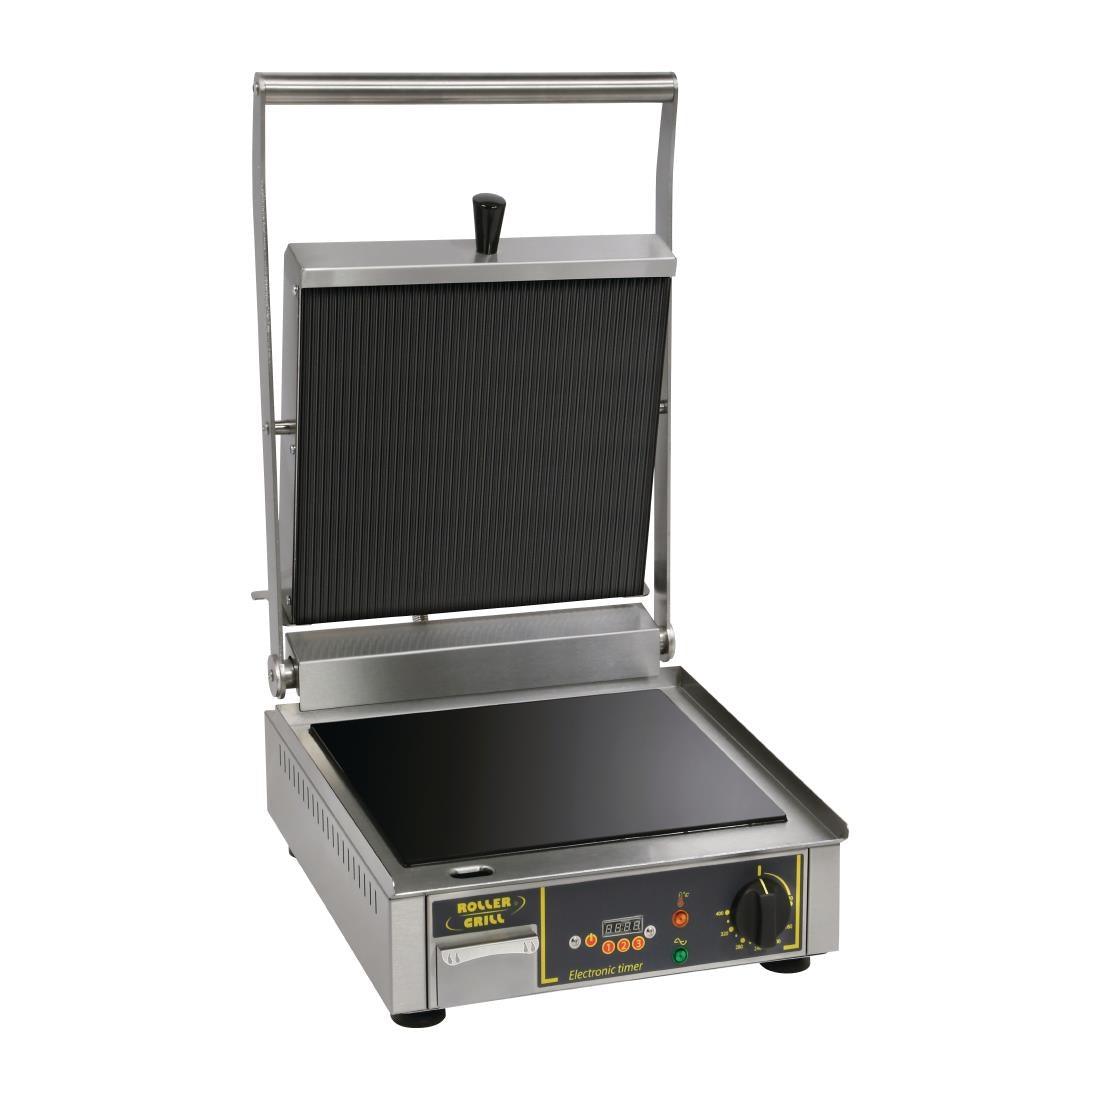 FE145 Roller Grill Premium VC L Single Ribbed Contact Grill JD Catering Equipment Solutions Ltd